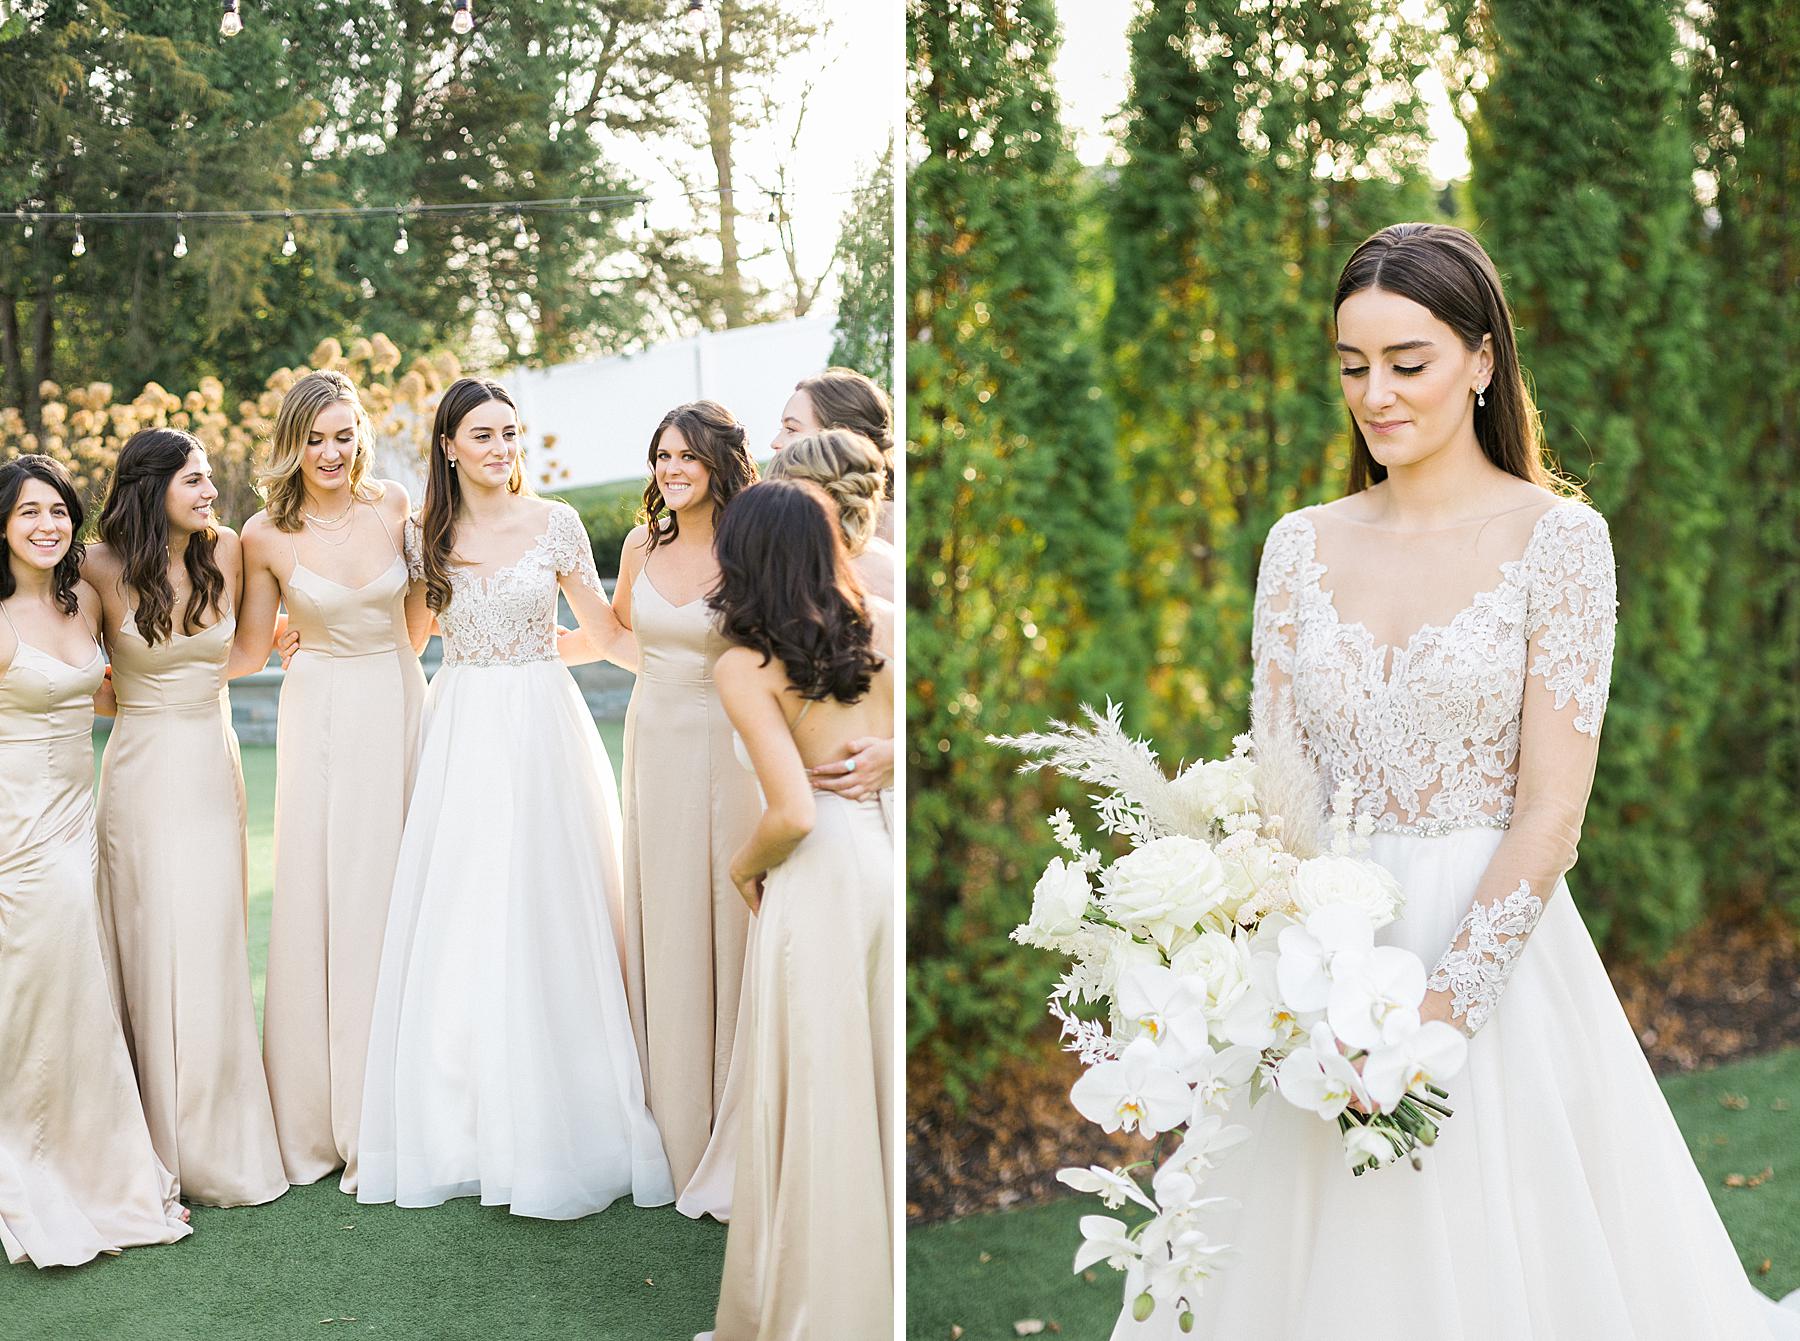 bride in white lace long sleeve gown walking with bridesmaids in nude champagne off-white dresses and white bouquets